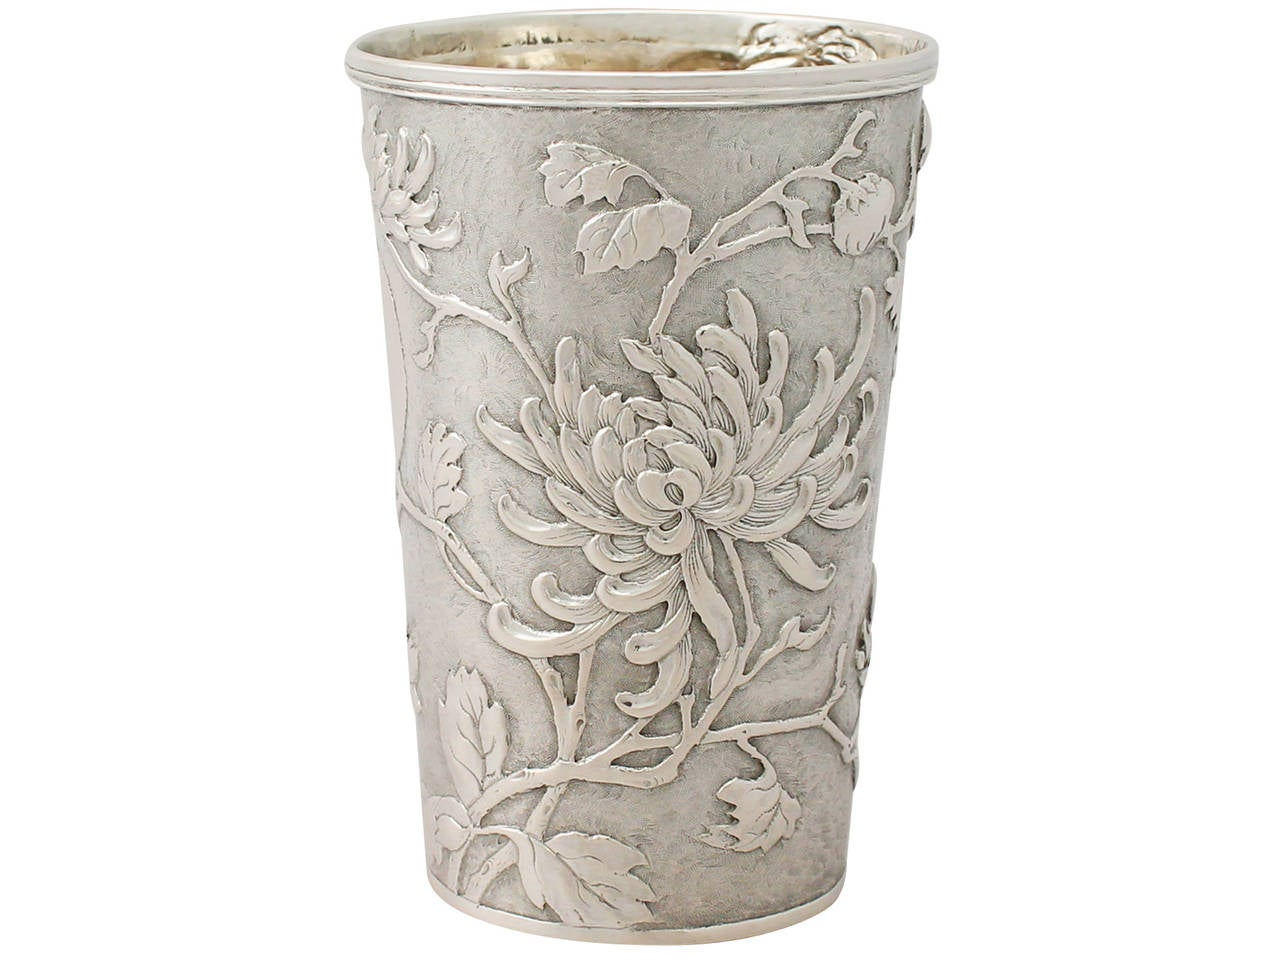 A fine and impressive antique Chinese export silver beaker; an addition to our range of Asian silverware

This fine antique Chinese export silver beaker has a cylindrical tapering form.

The body is embellished with fine and impressive embossed